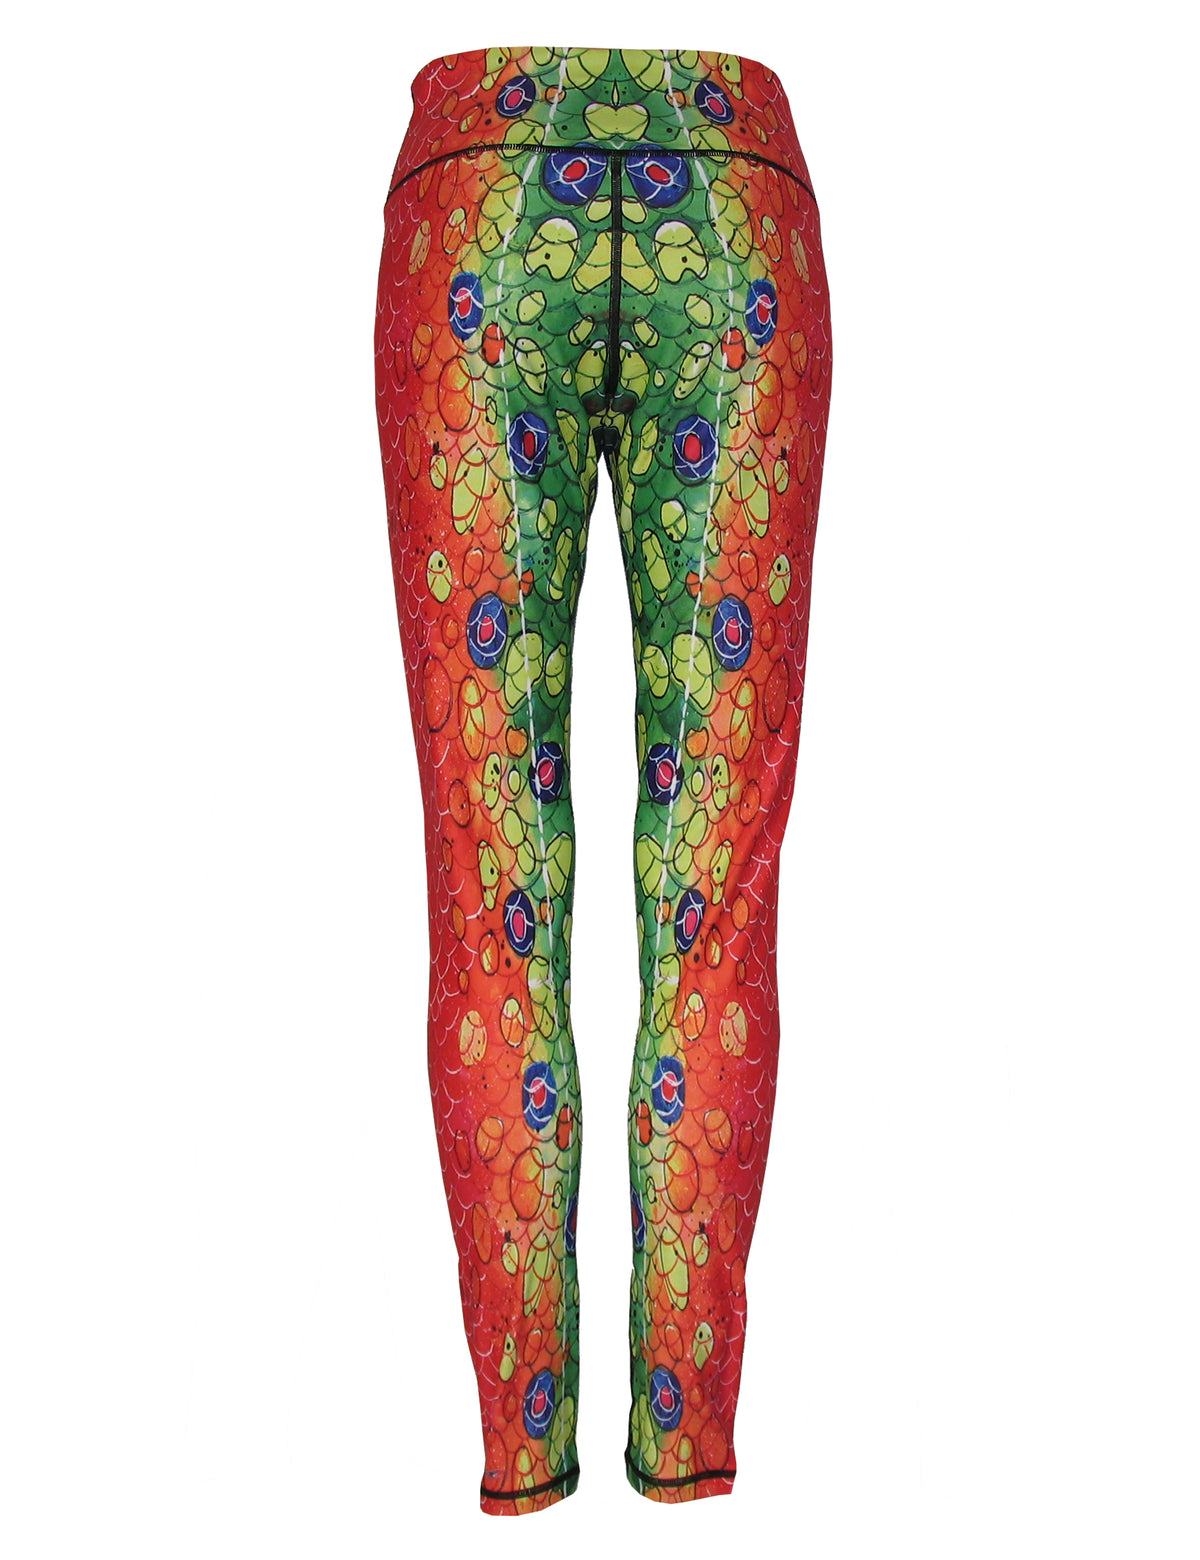 Brook Trout2 All Sport Leggings make a fashion move on the Yoga Mat or hike, camp or backpack in complete comfort. Great Fly Fishing Apparel designed with you in mind